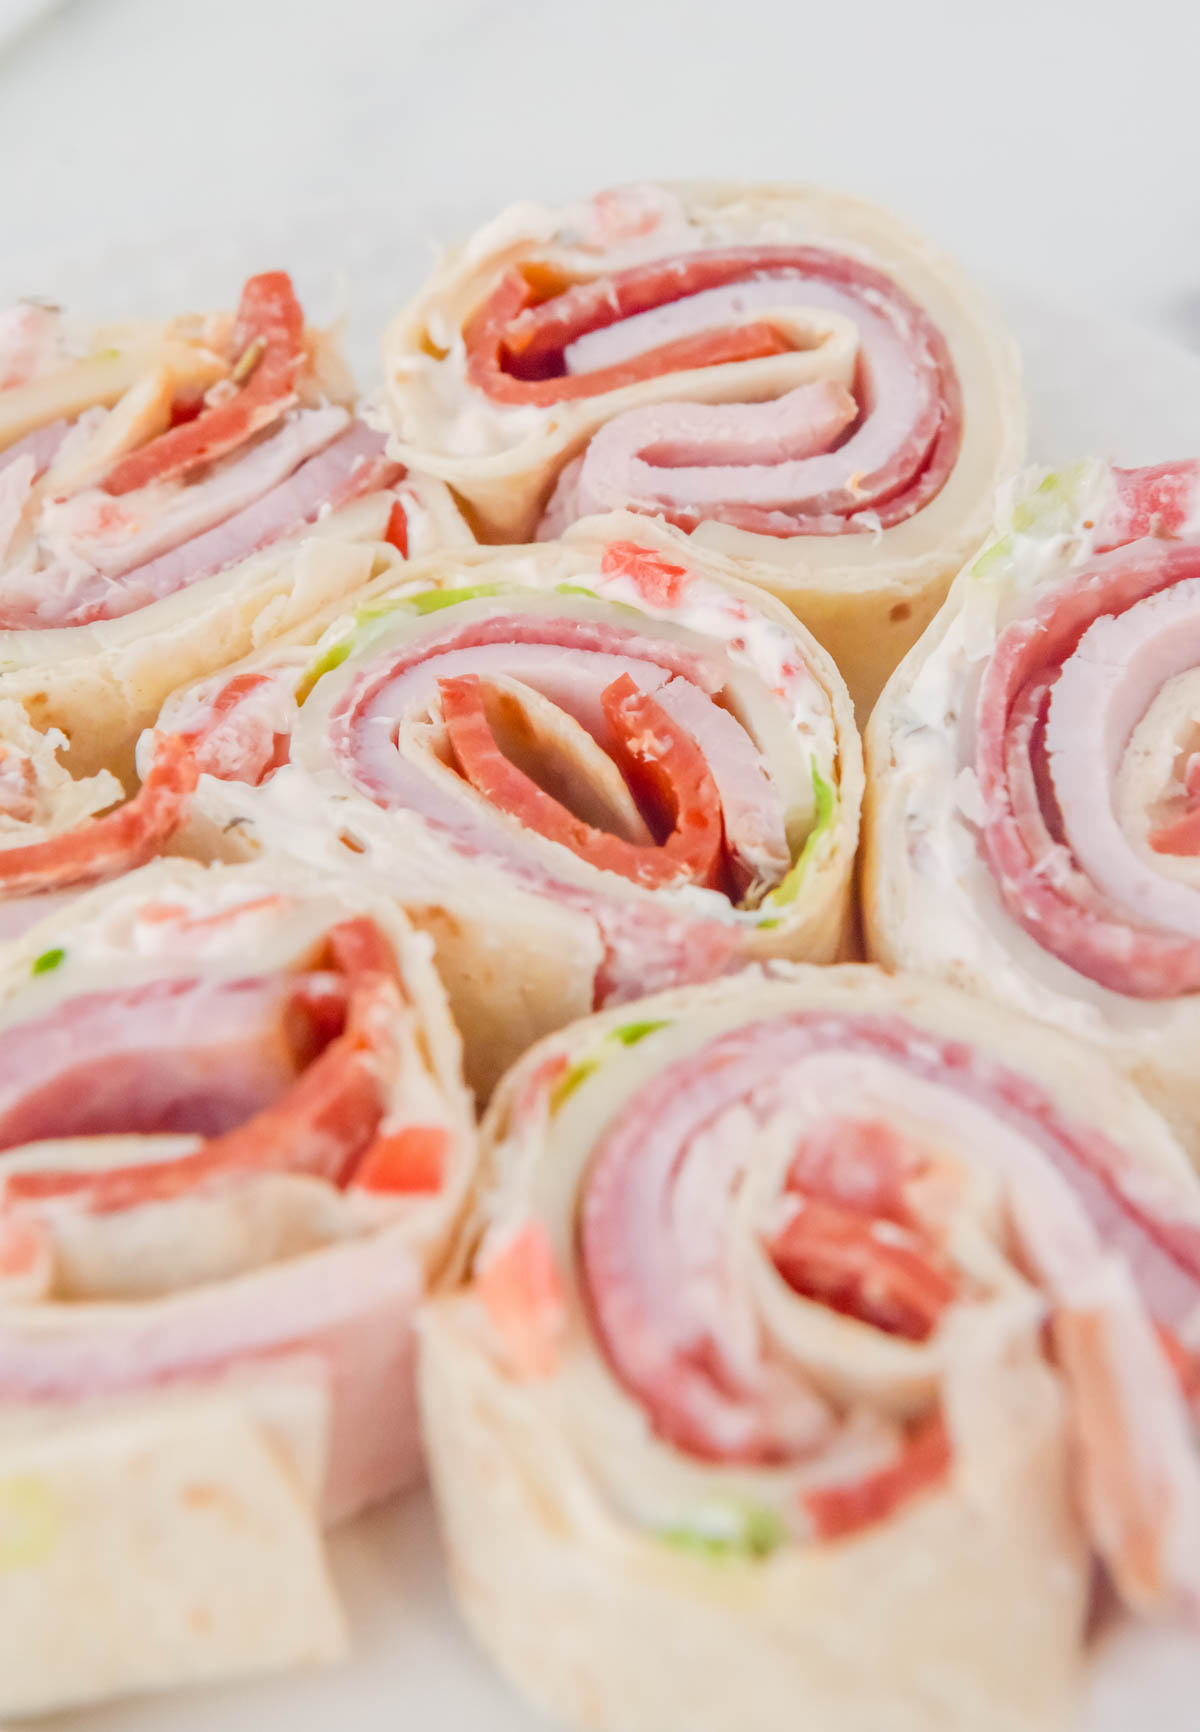 Ham and cheese roll ups on a plate.